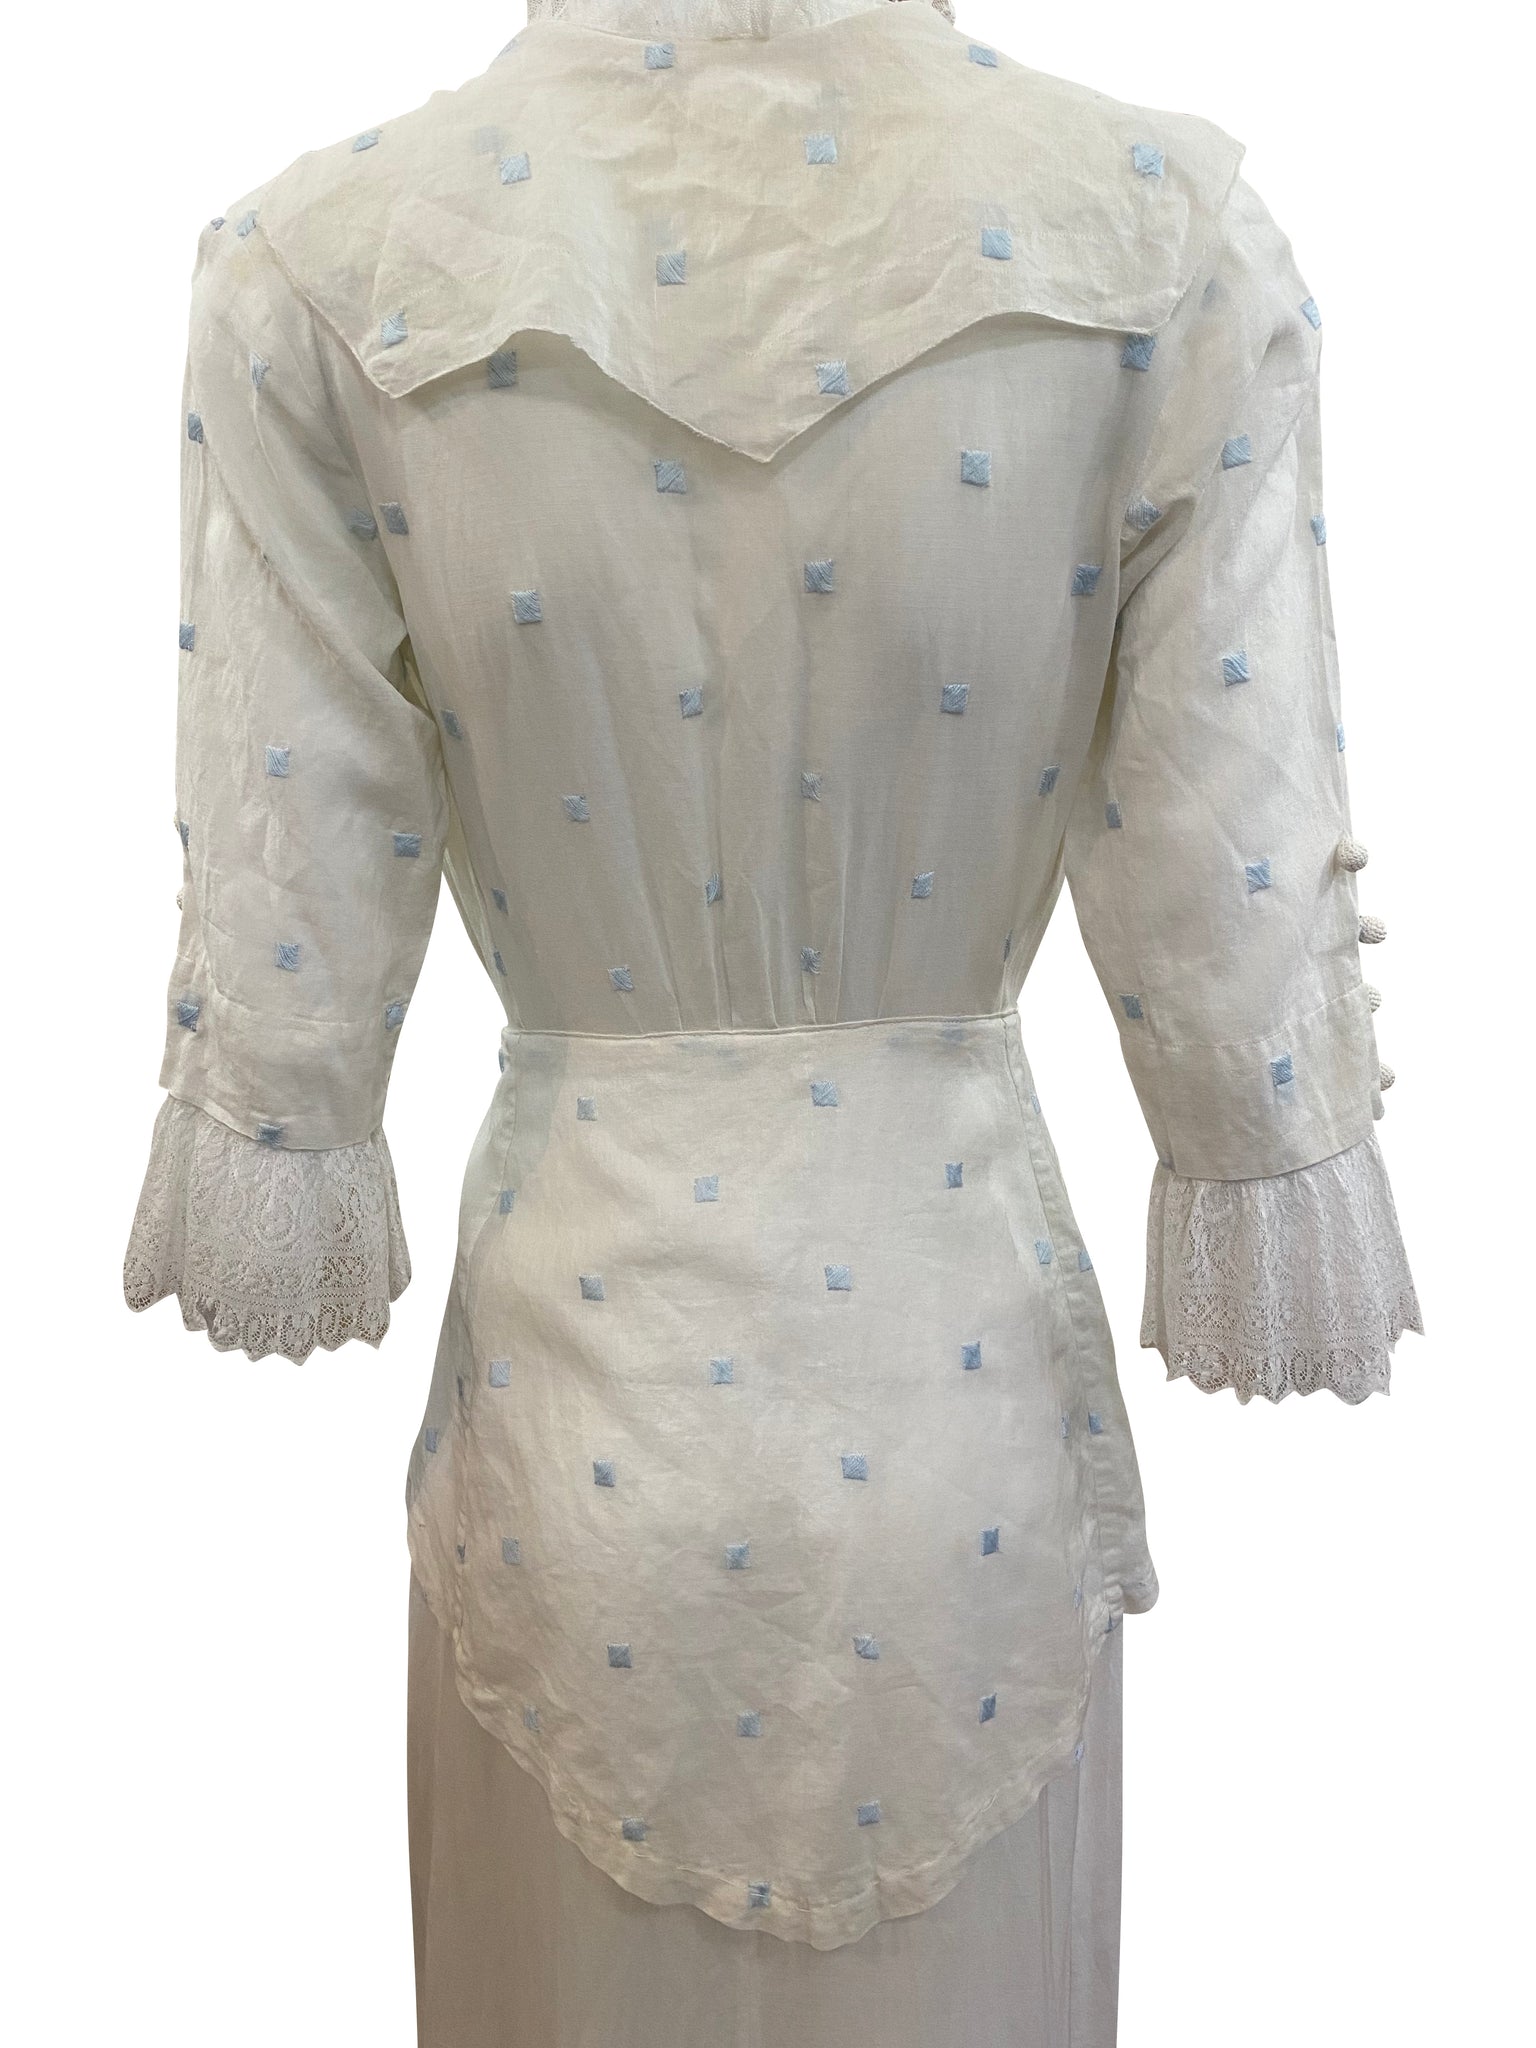 Edwardian White with Hand Embroidered Blue Polka Dot Lawn Dress, back detail